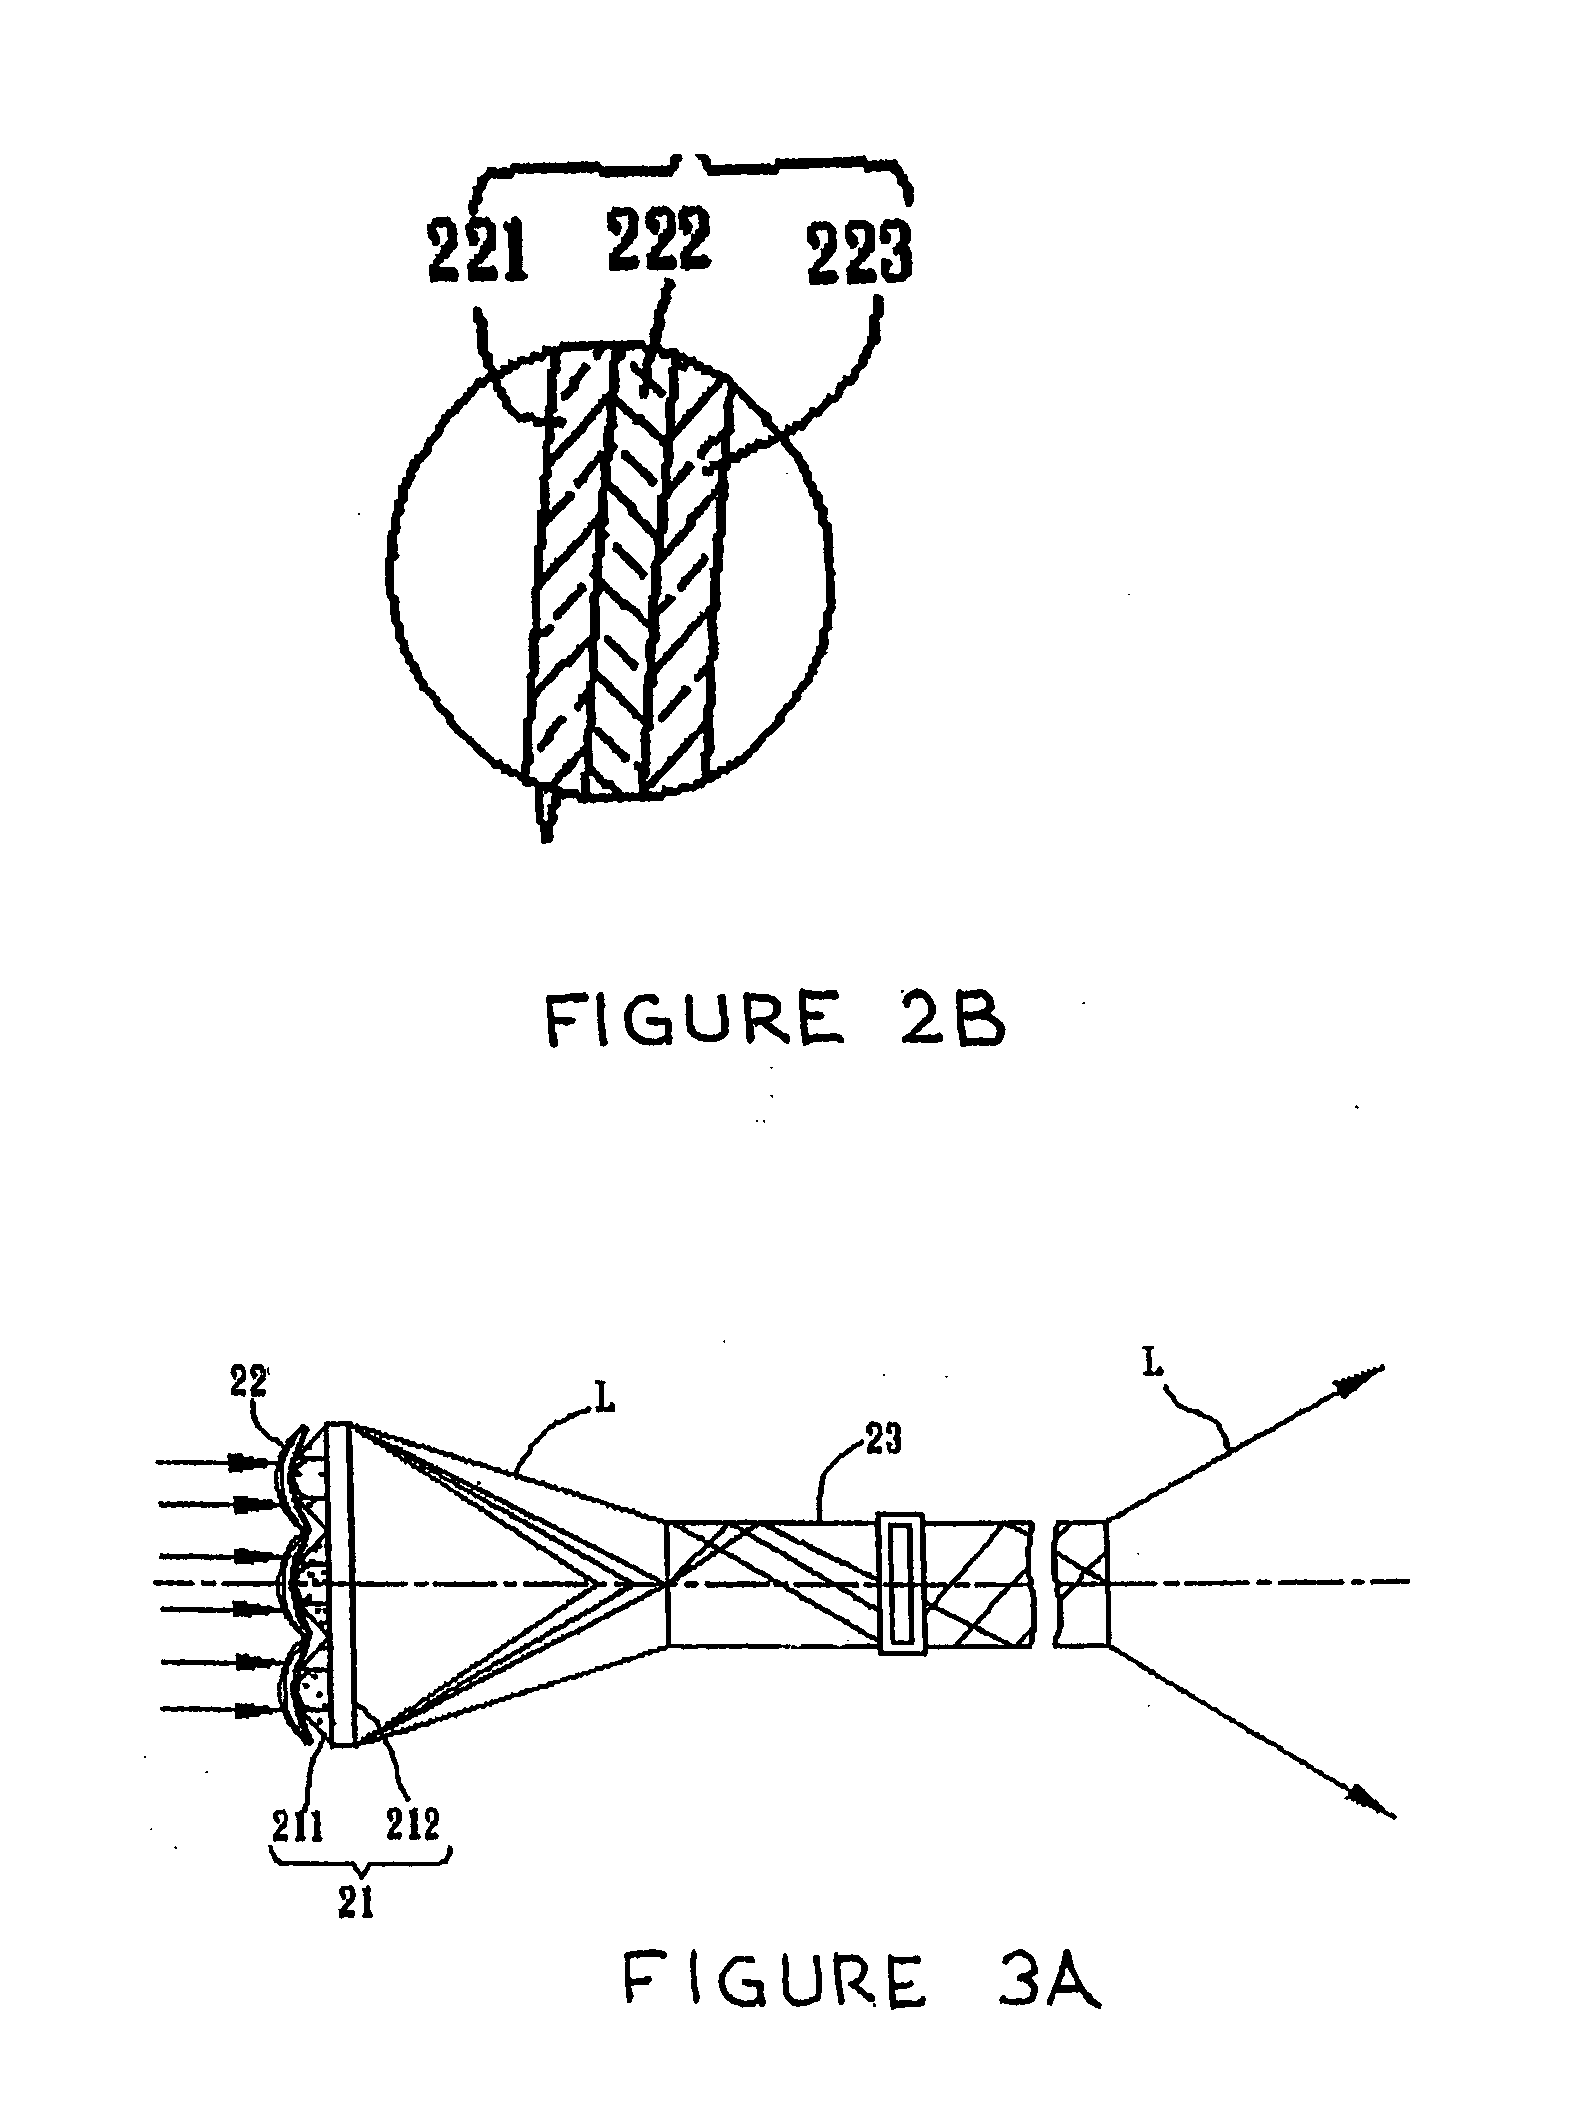 Light collection device